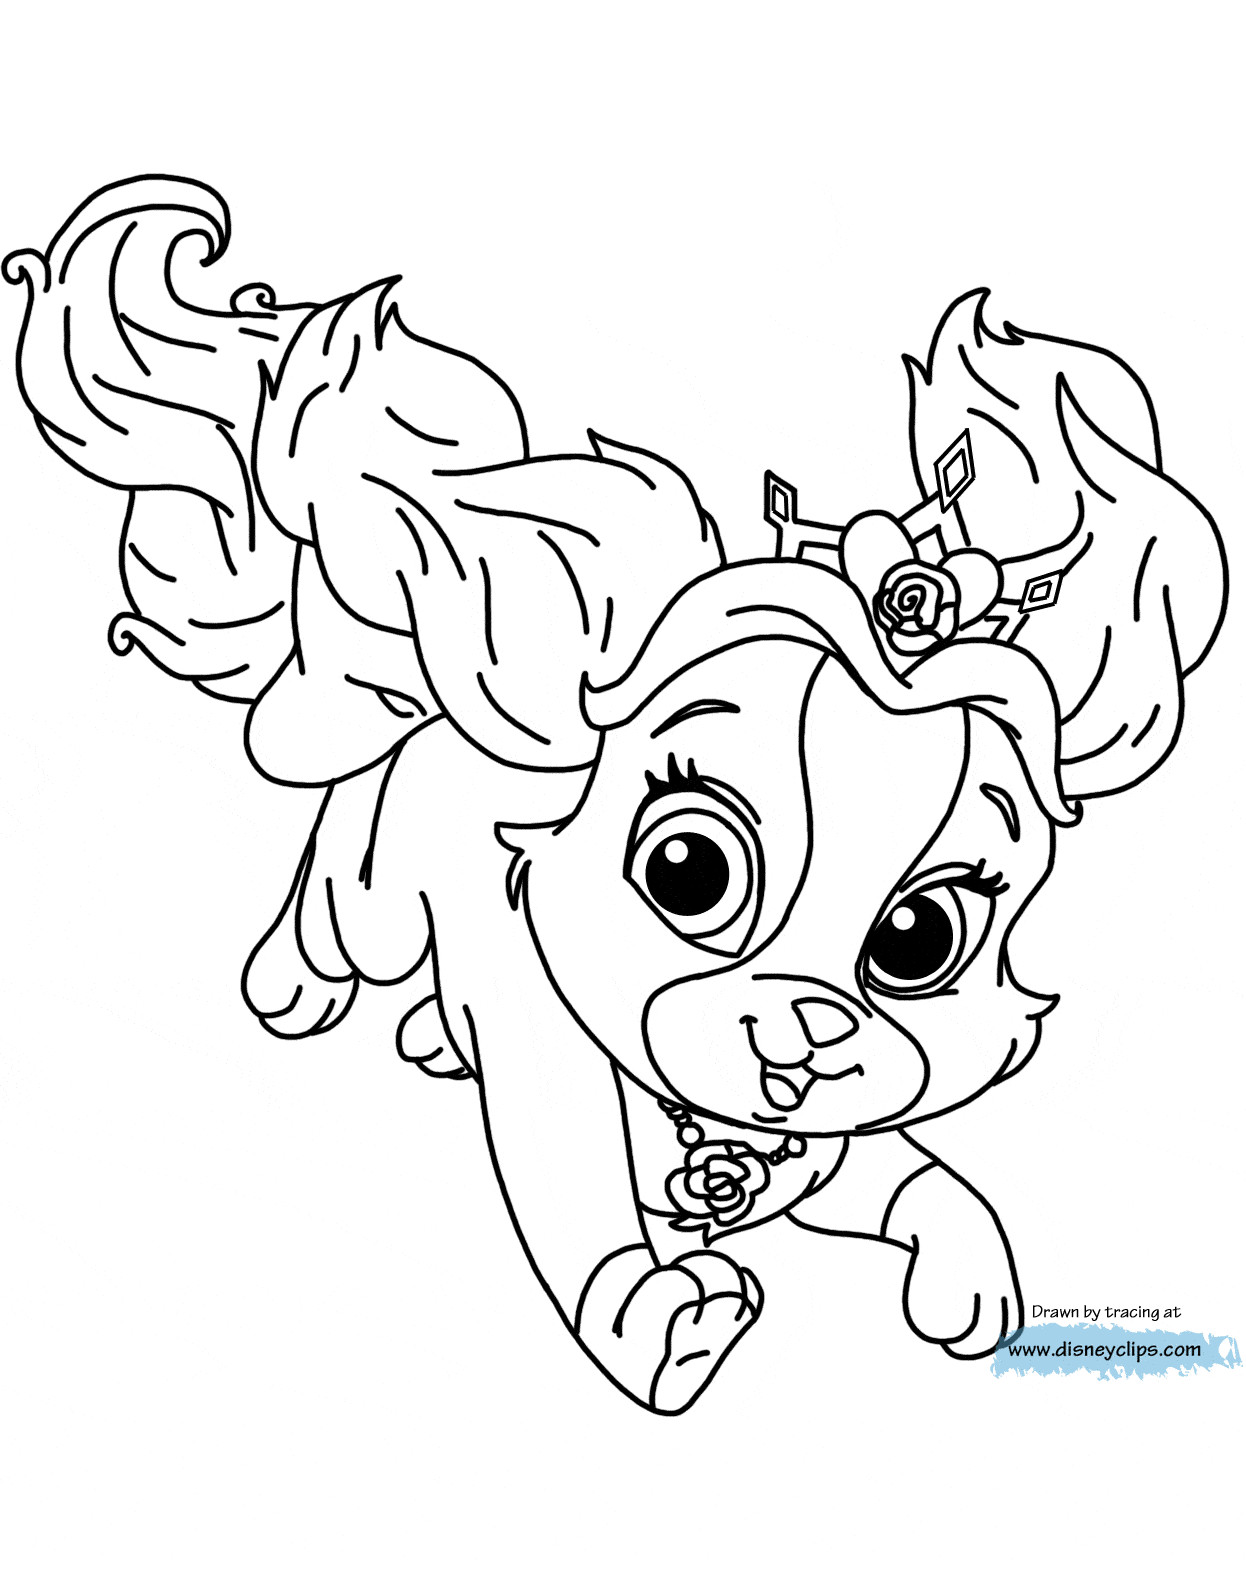 Palace Pets Coloring Sheets For Girls
 Disney Palace Pets Printable Coloring Pages 3